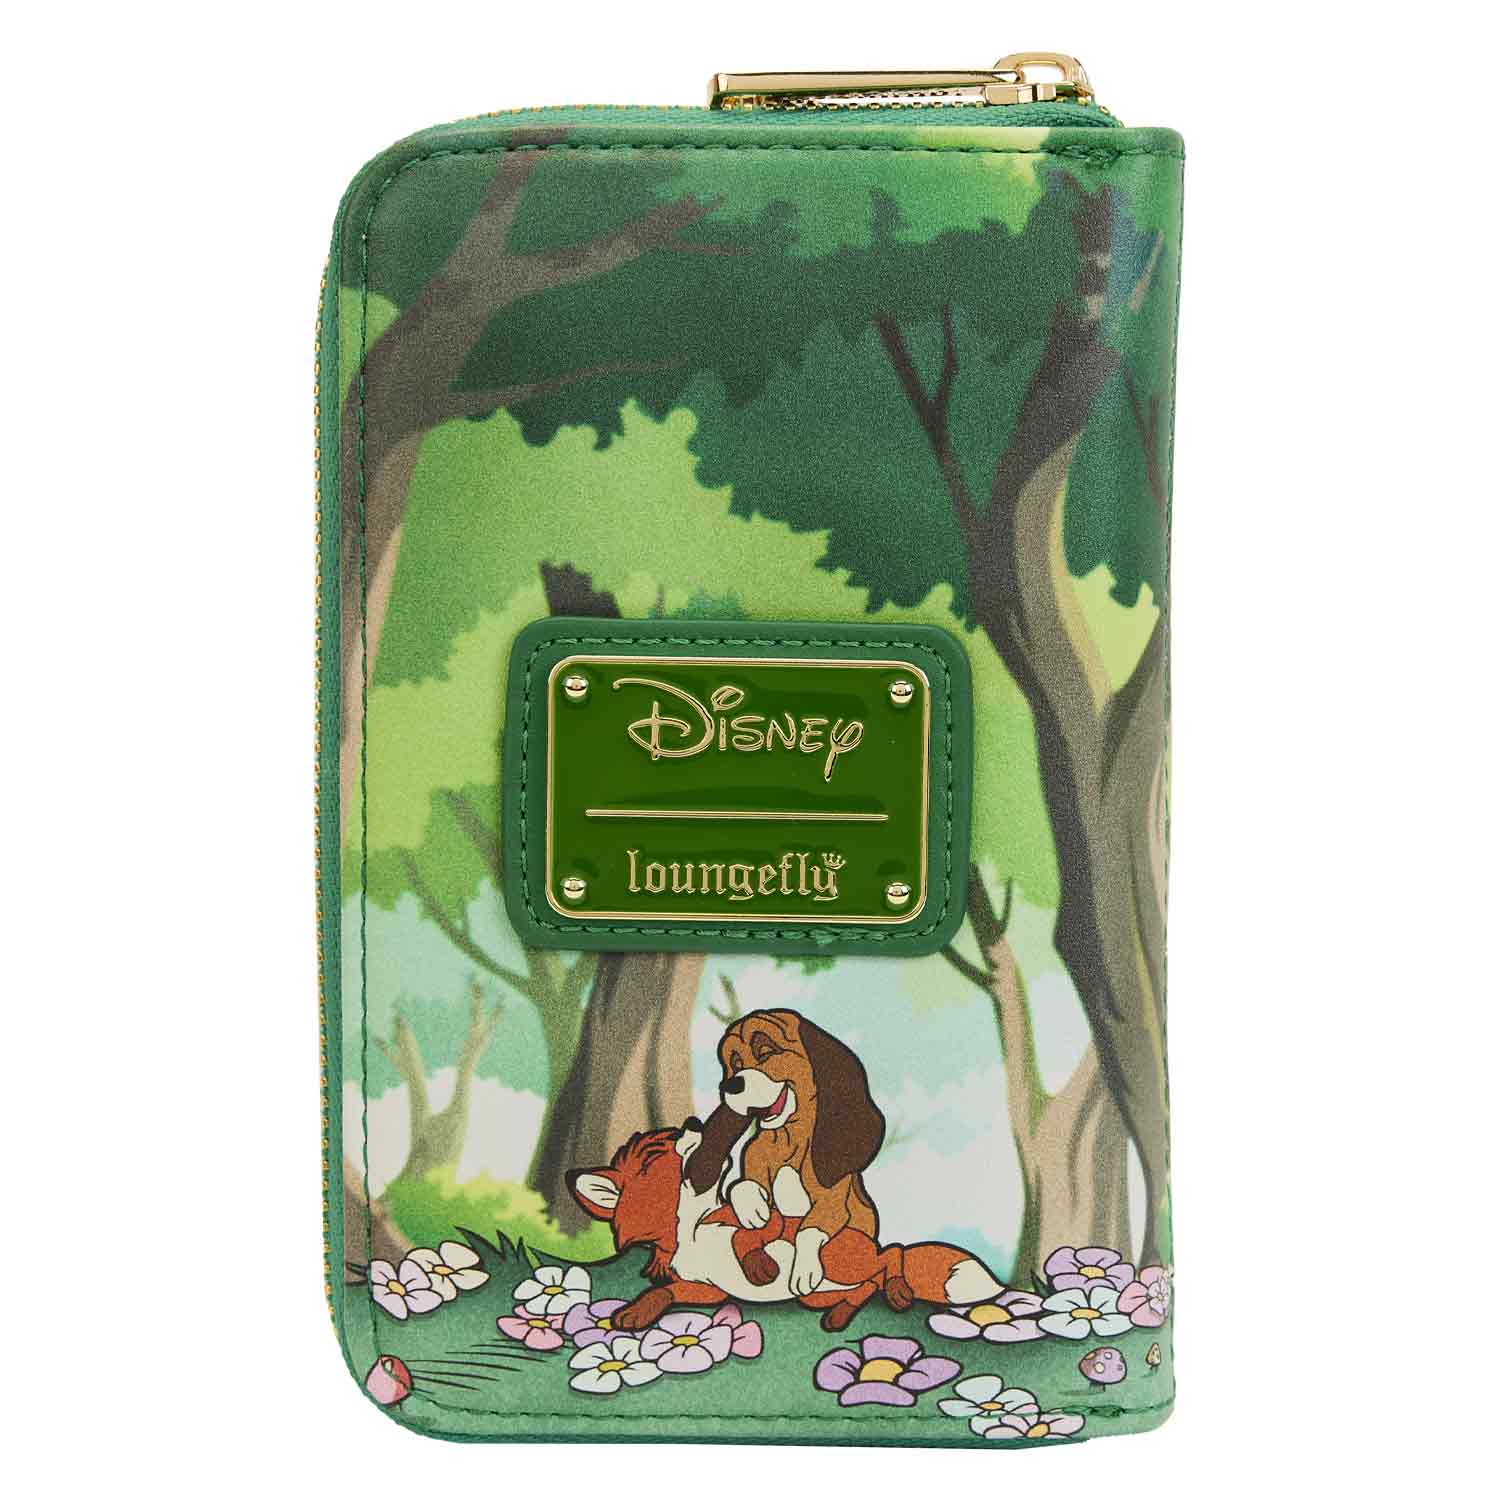 Loungefly x Disney The Fox and The Hound Book Purse